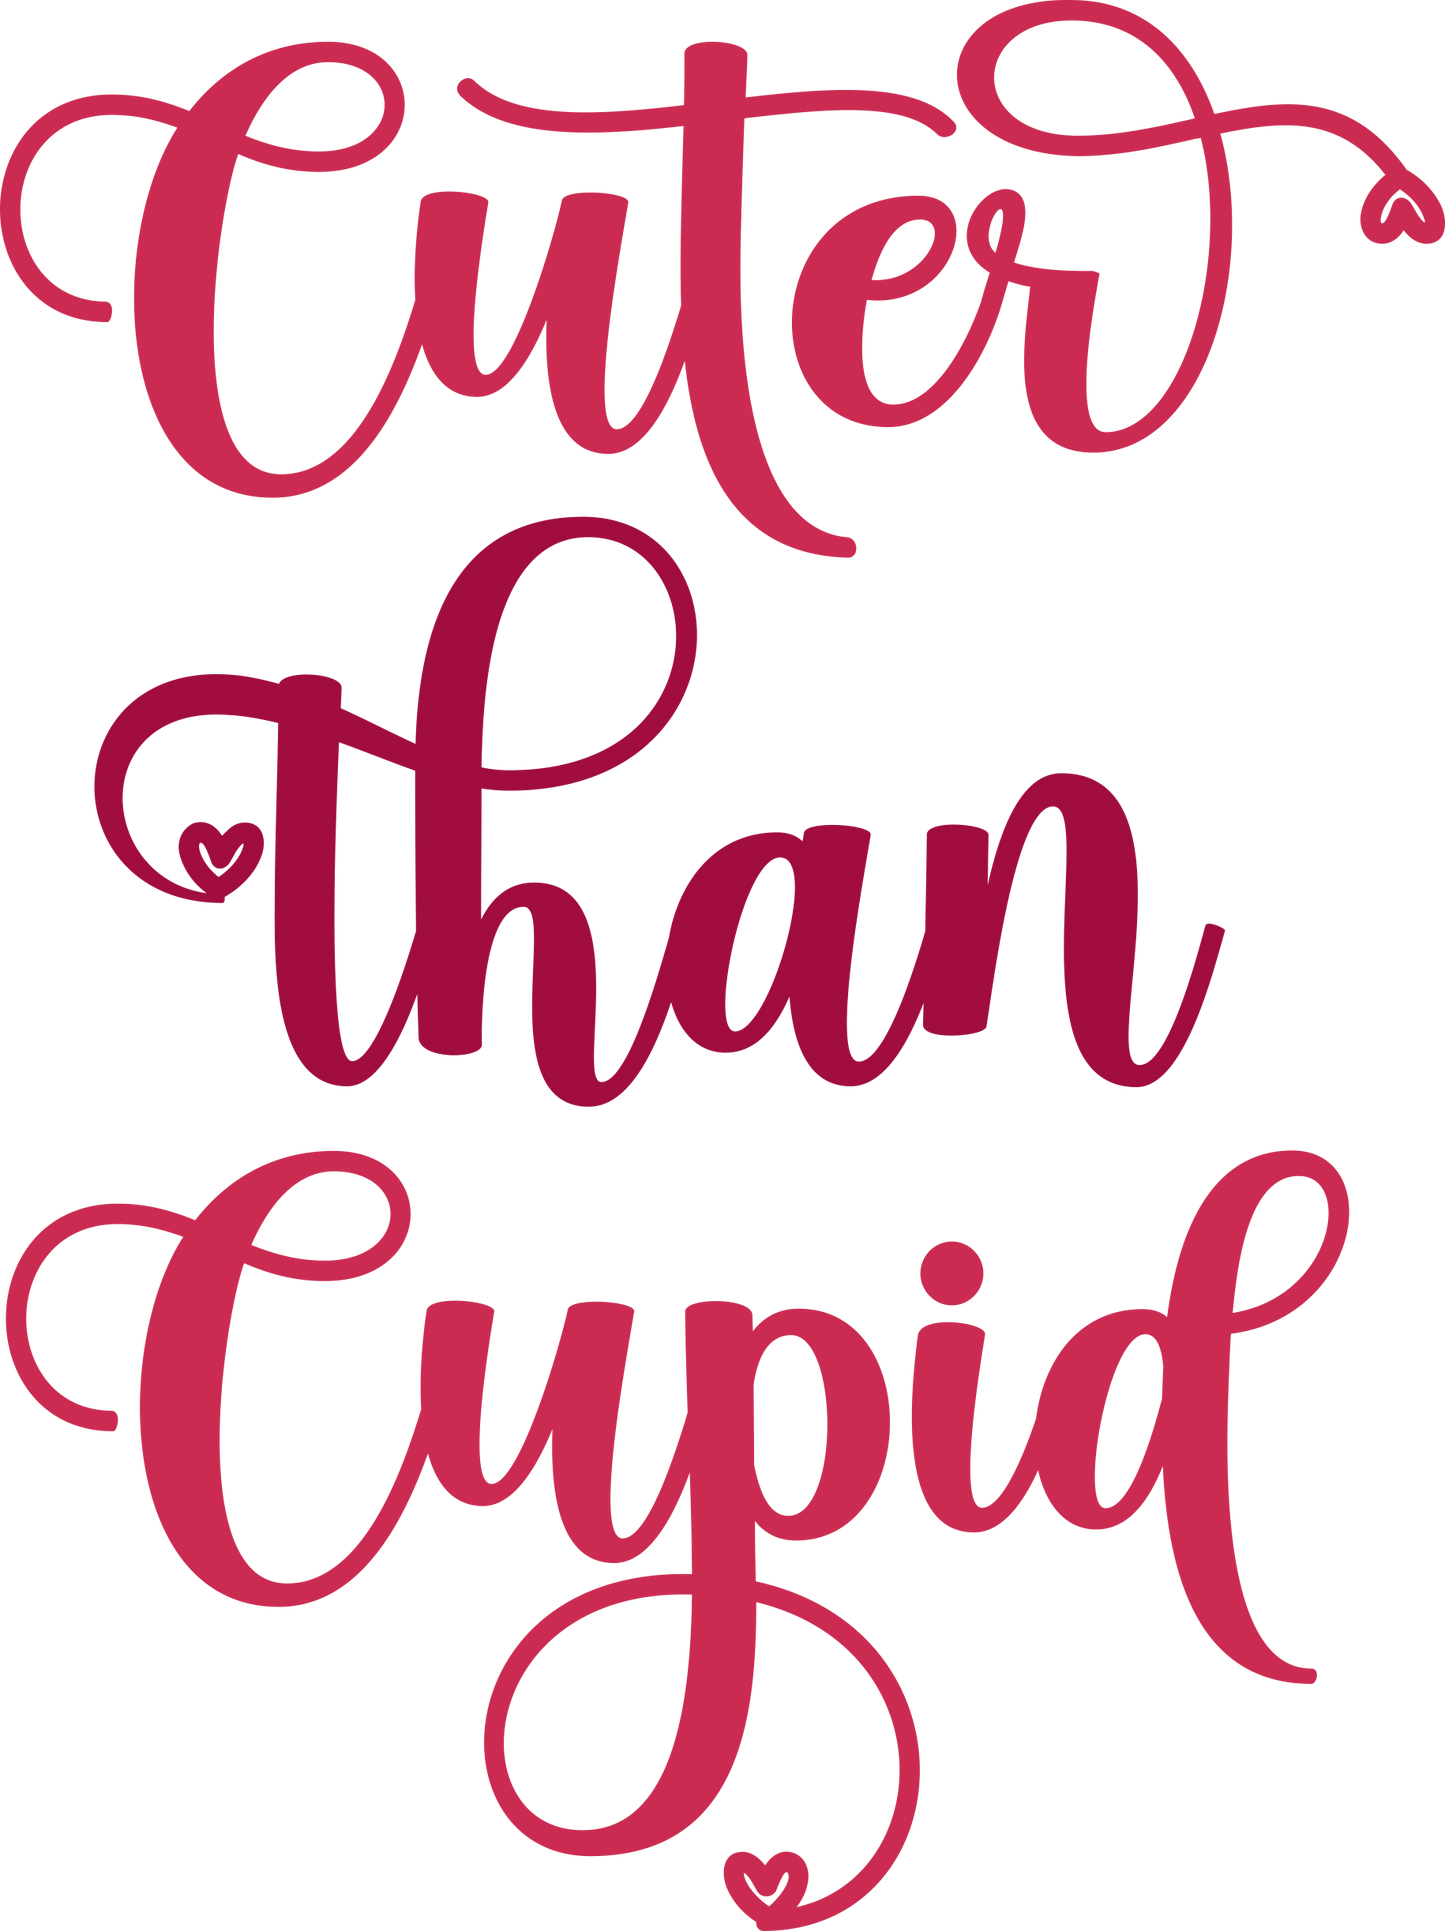 VALENTINE'S DAY PRINT 71 - Cuter that cupid